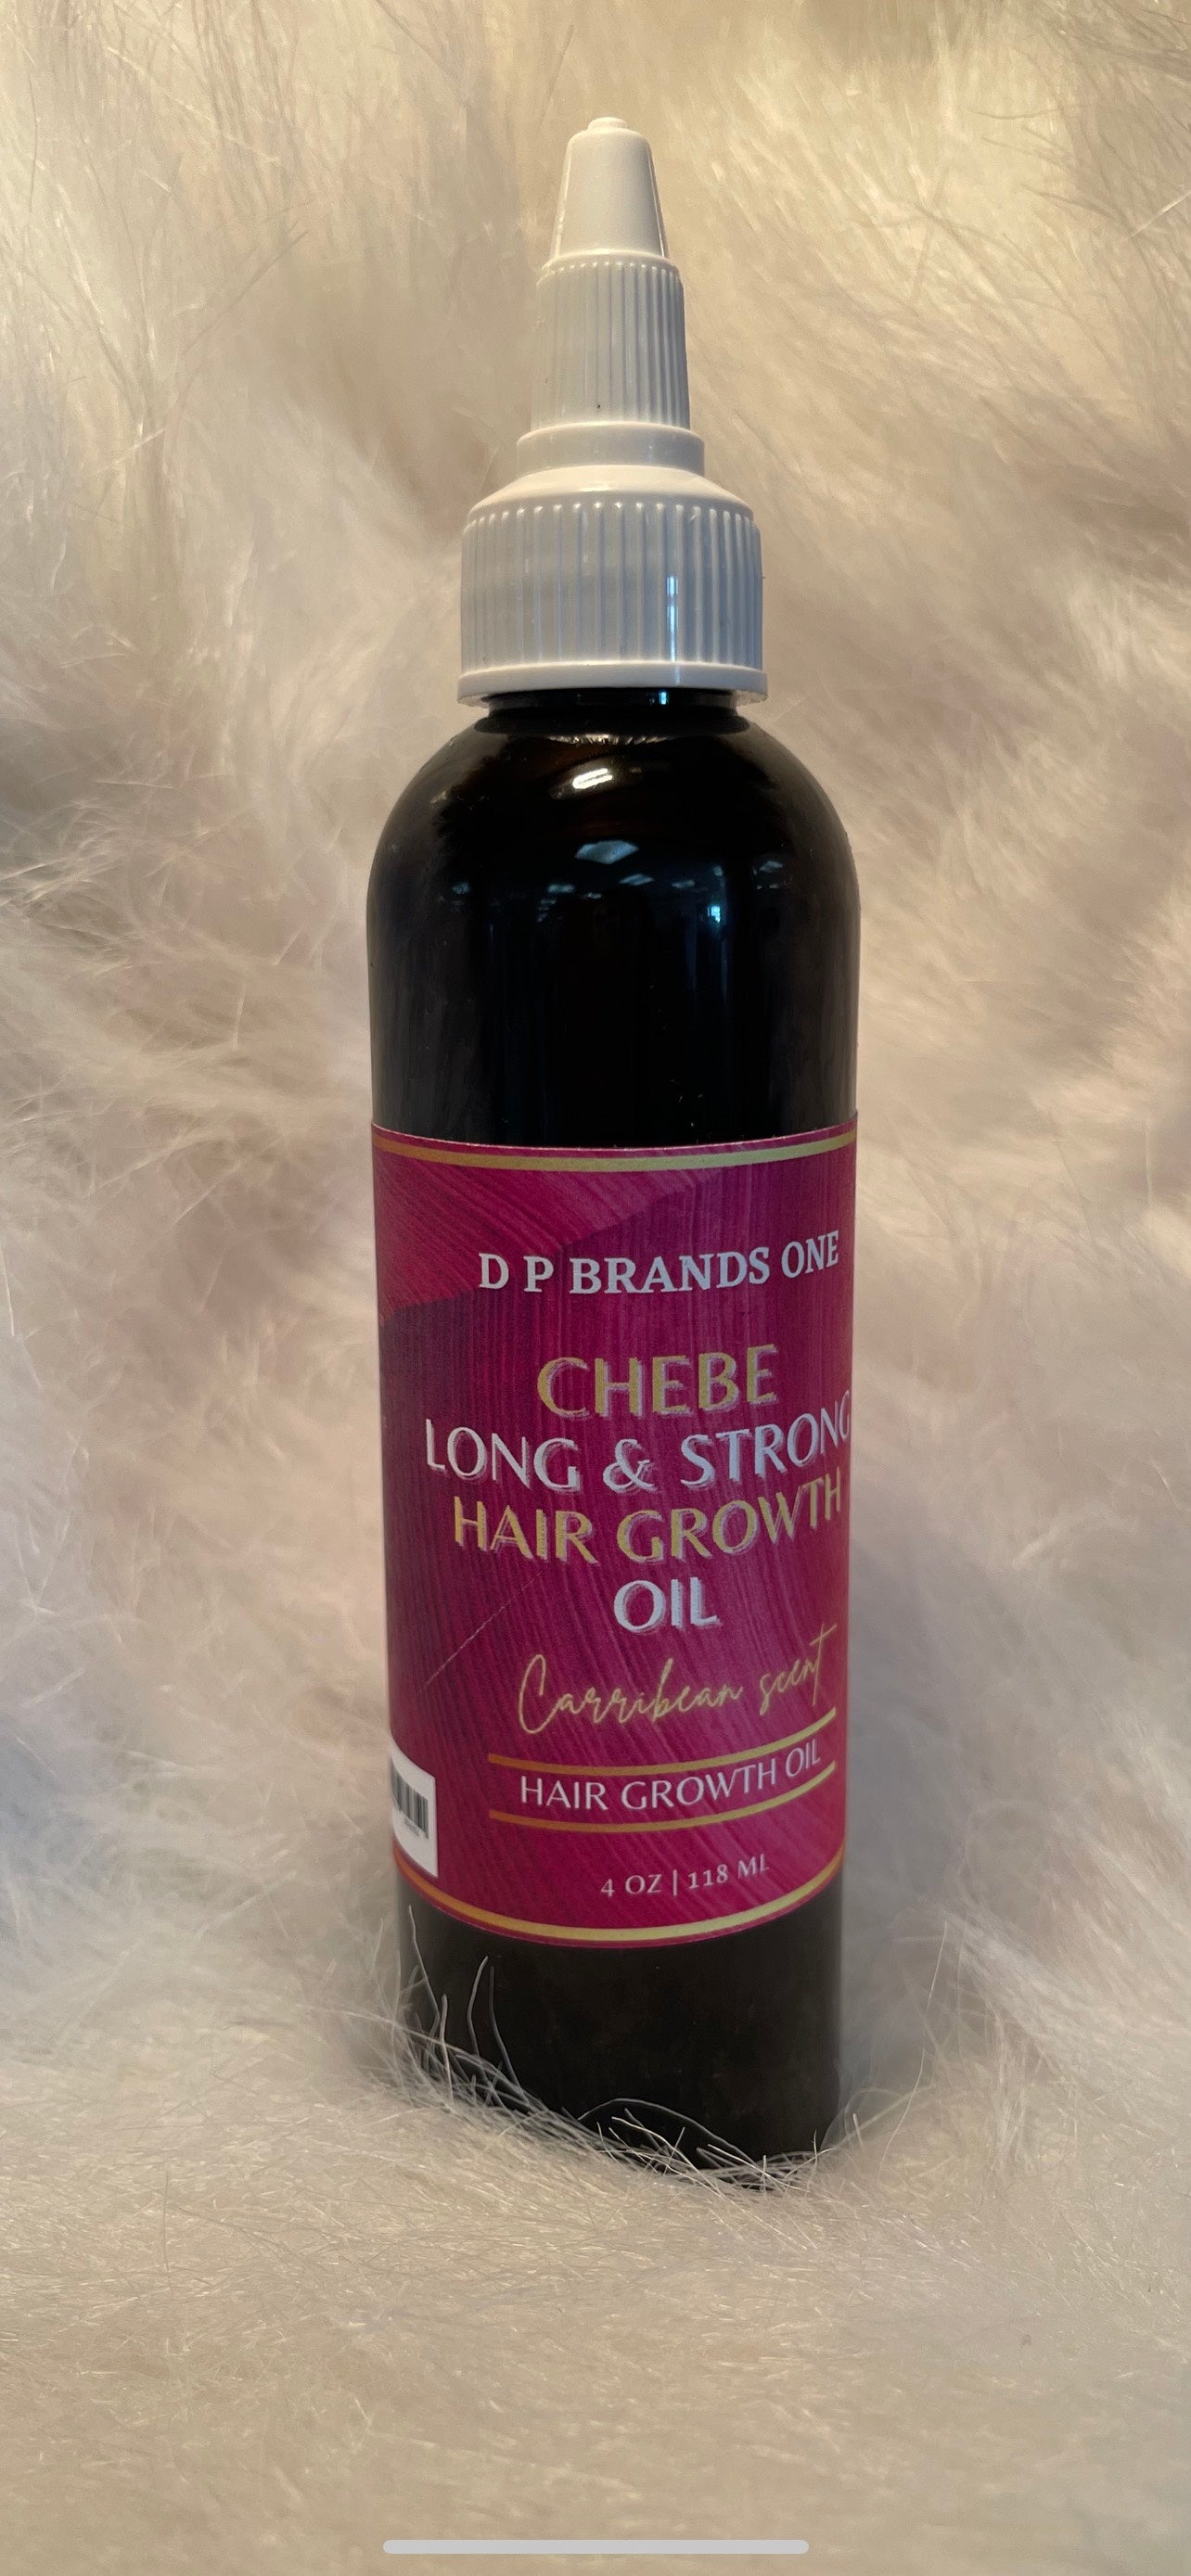 Chebe Long & Strong Hair Growth Oil